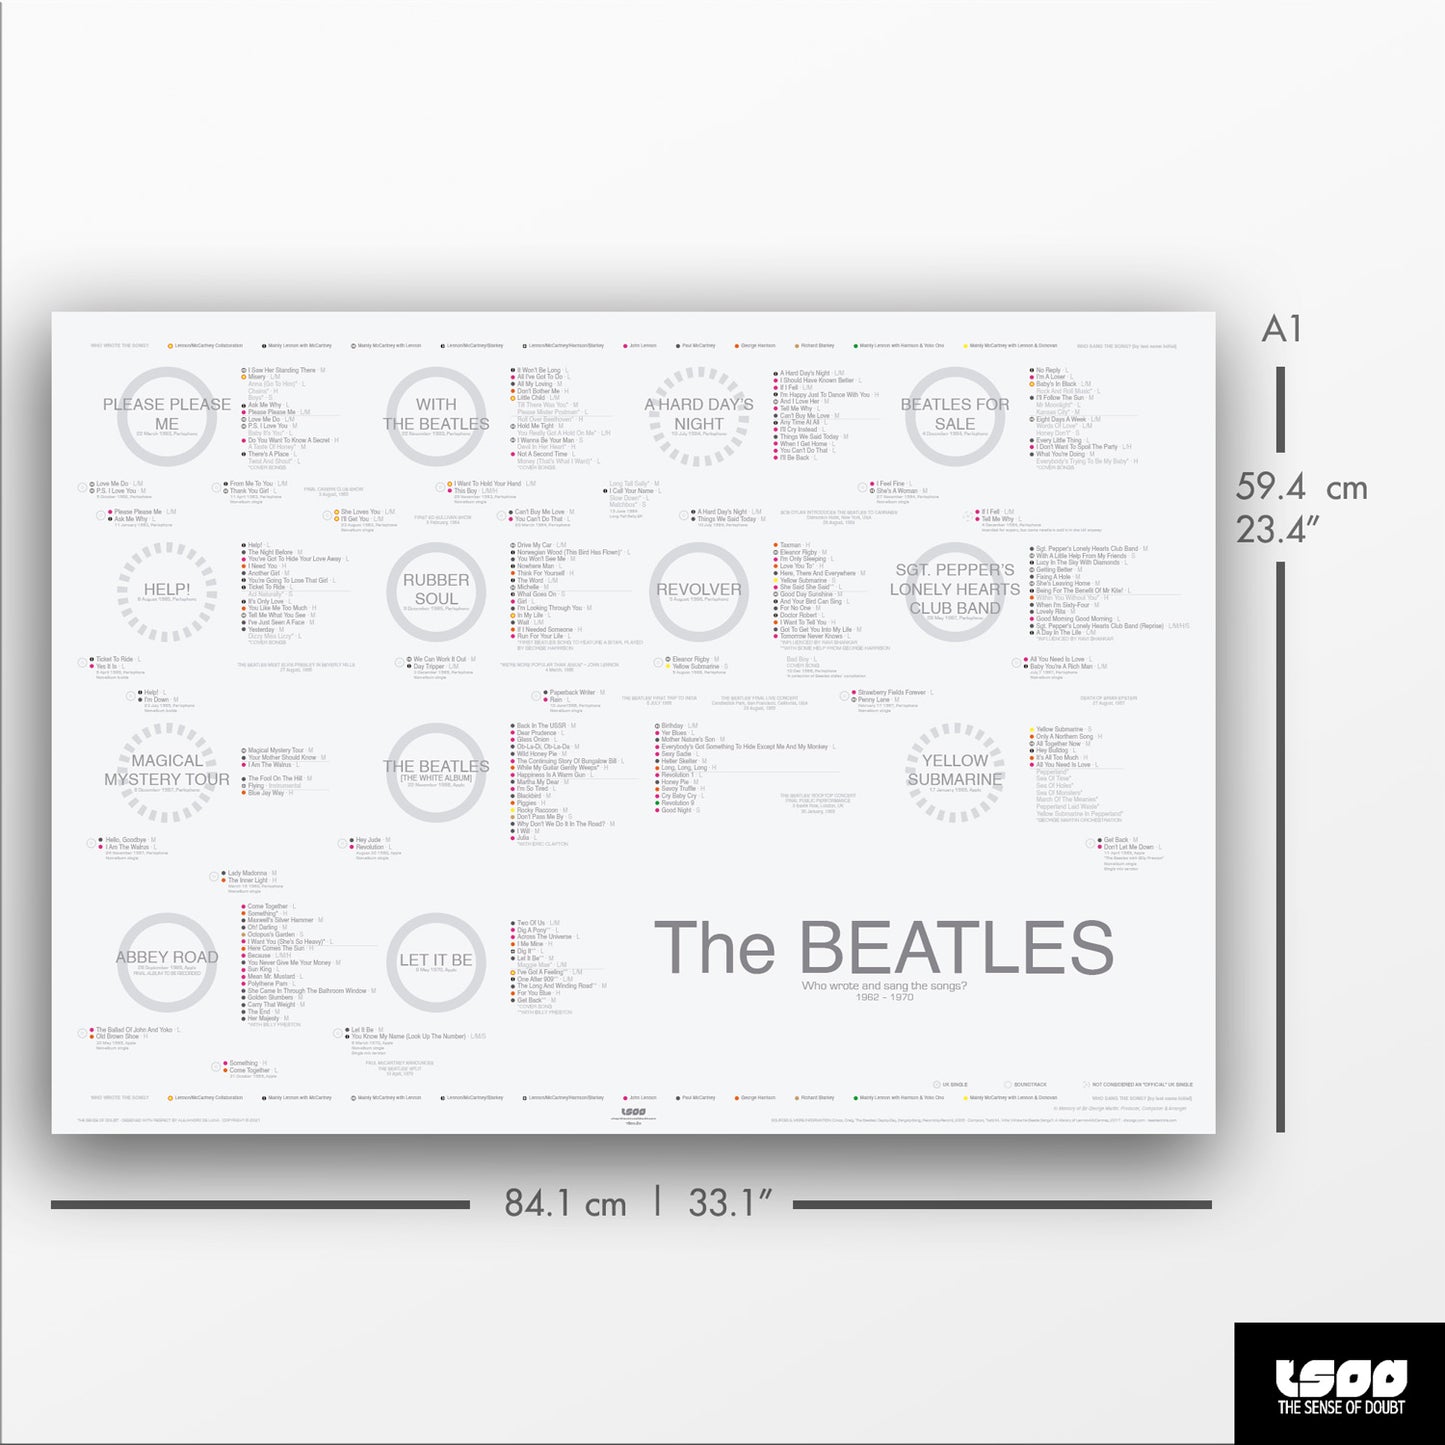 The Beatles' Discography: A Visual Guide to Who Wrote and Sang the Songs